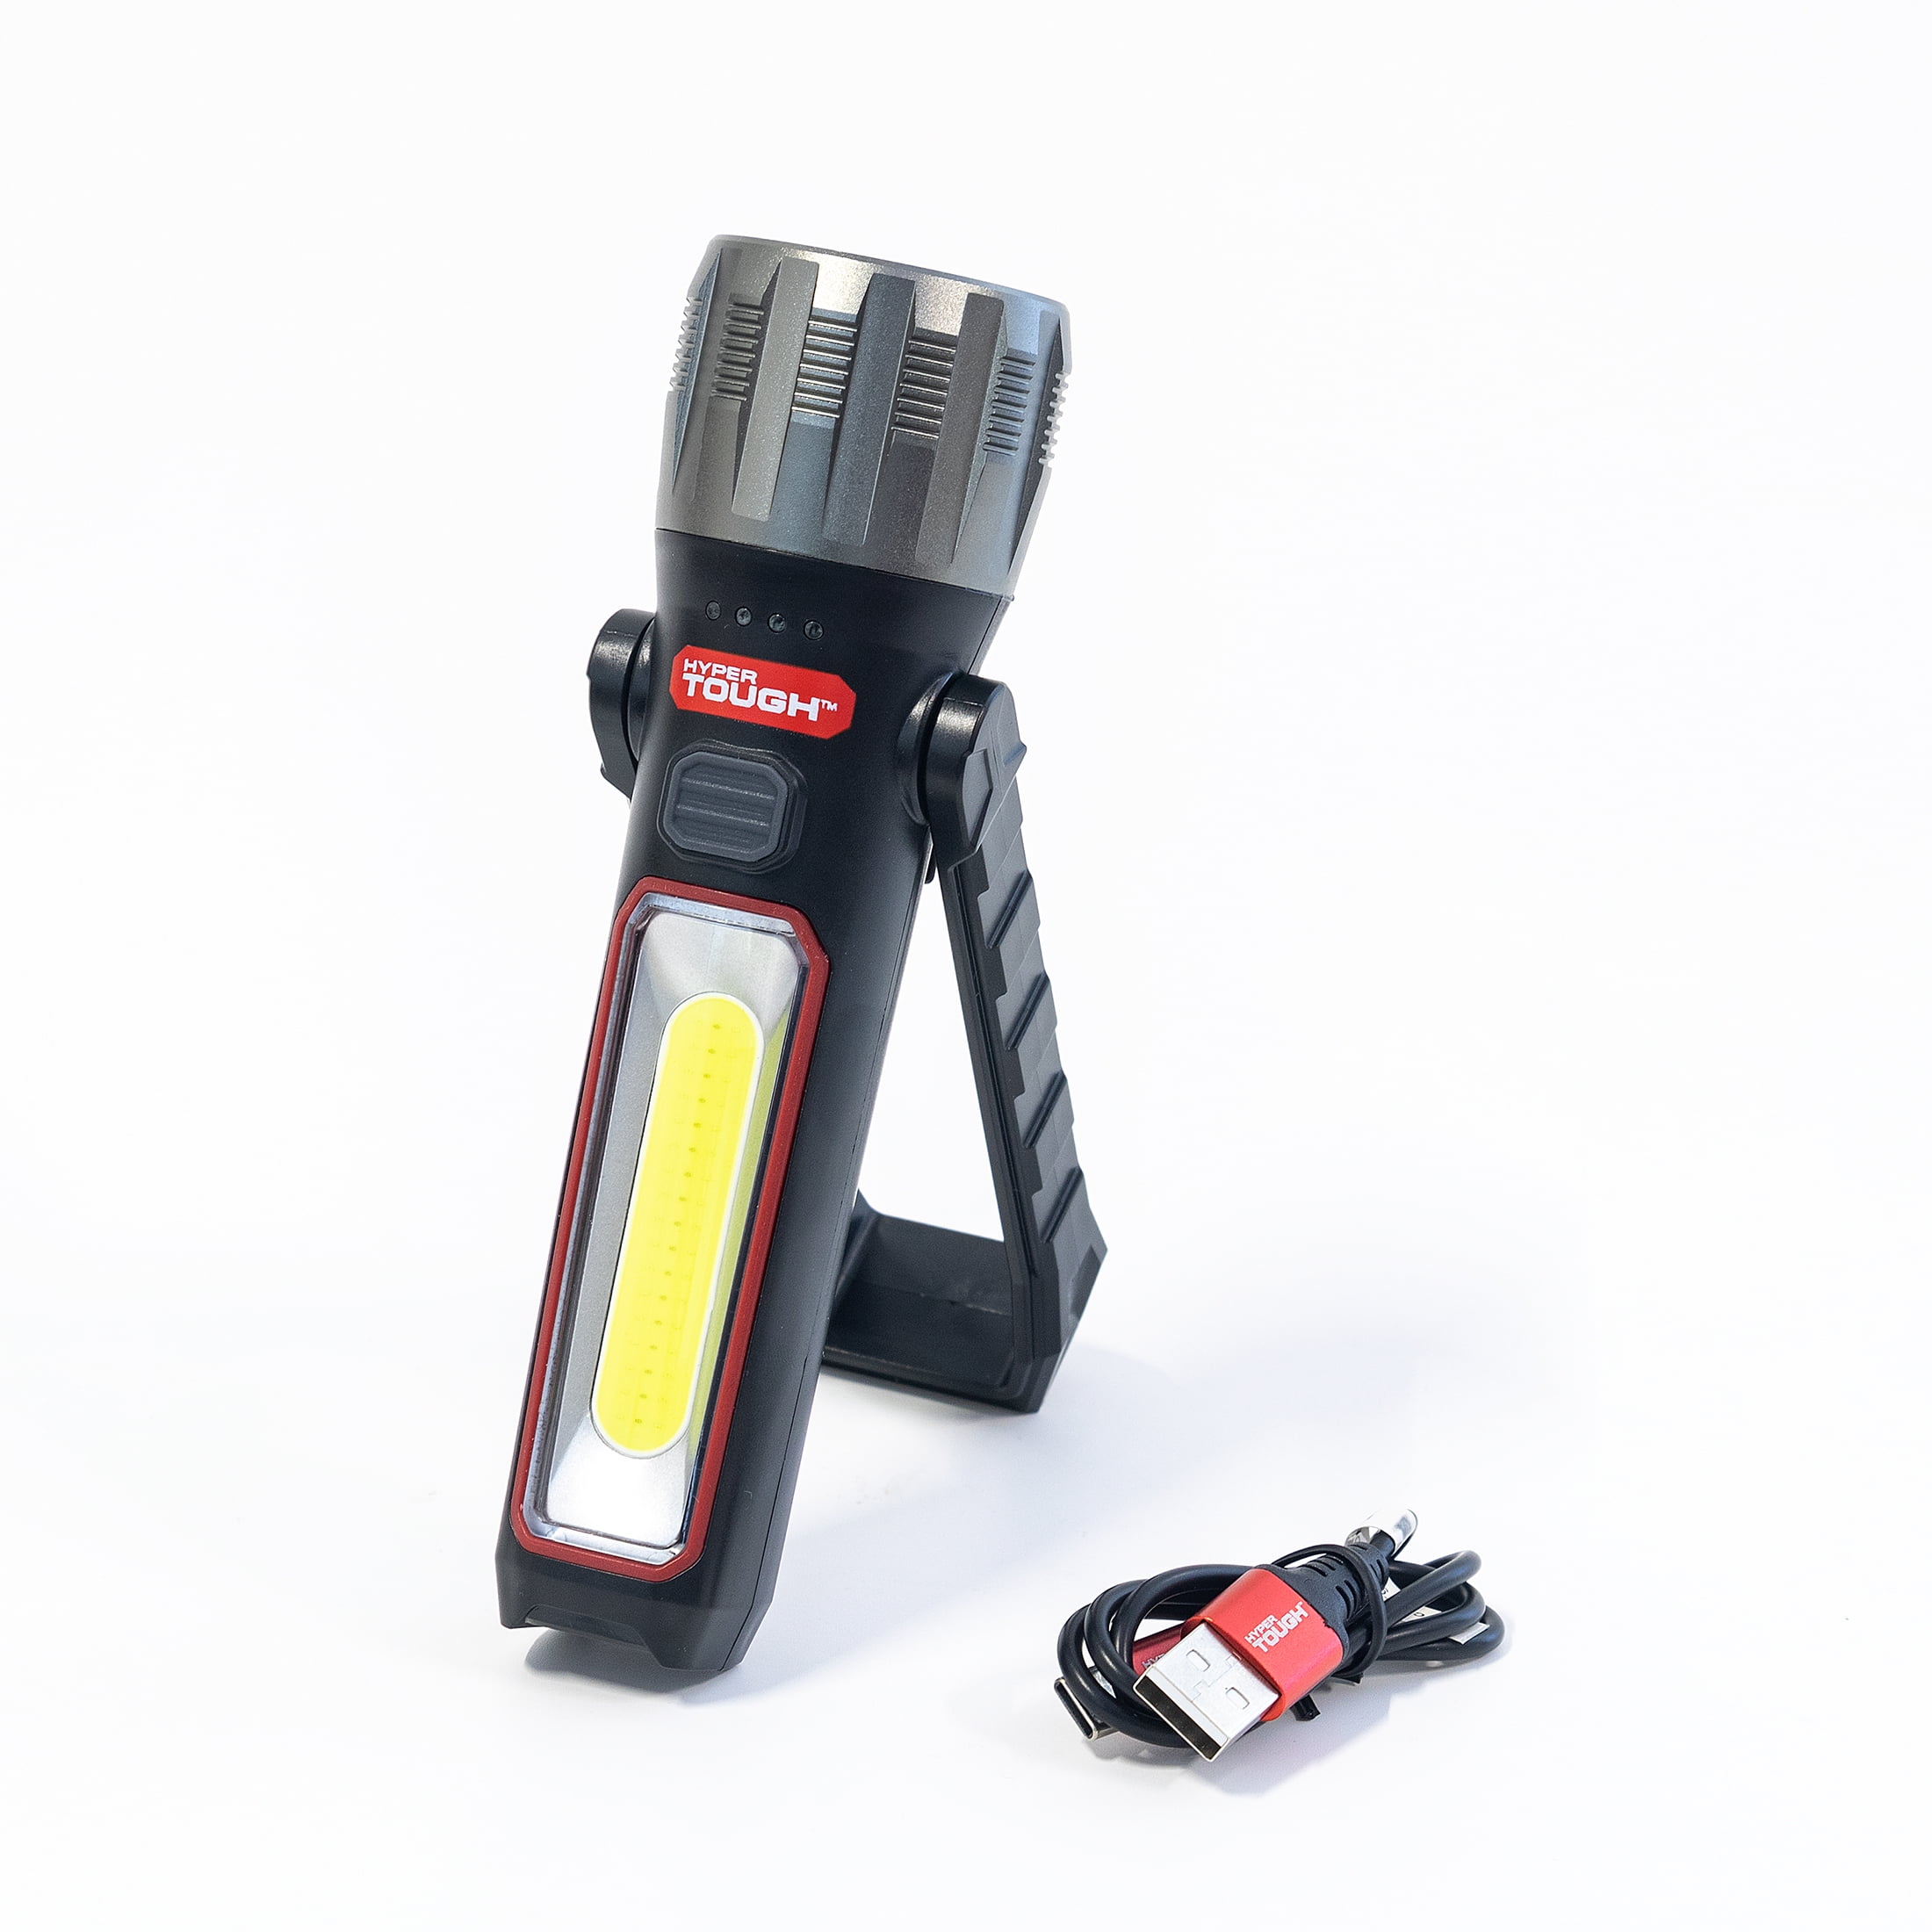 Chuck-Lamp Portable Rechargeable Work light